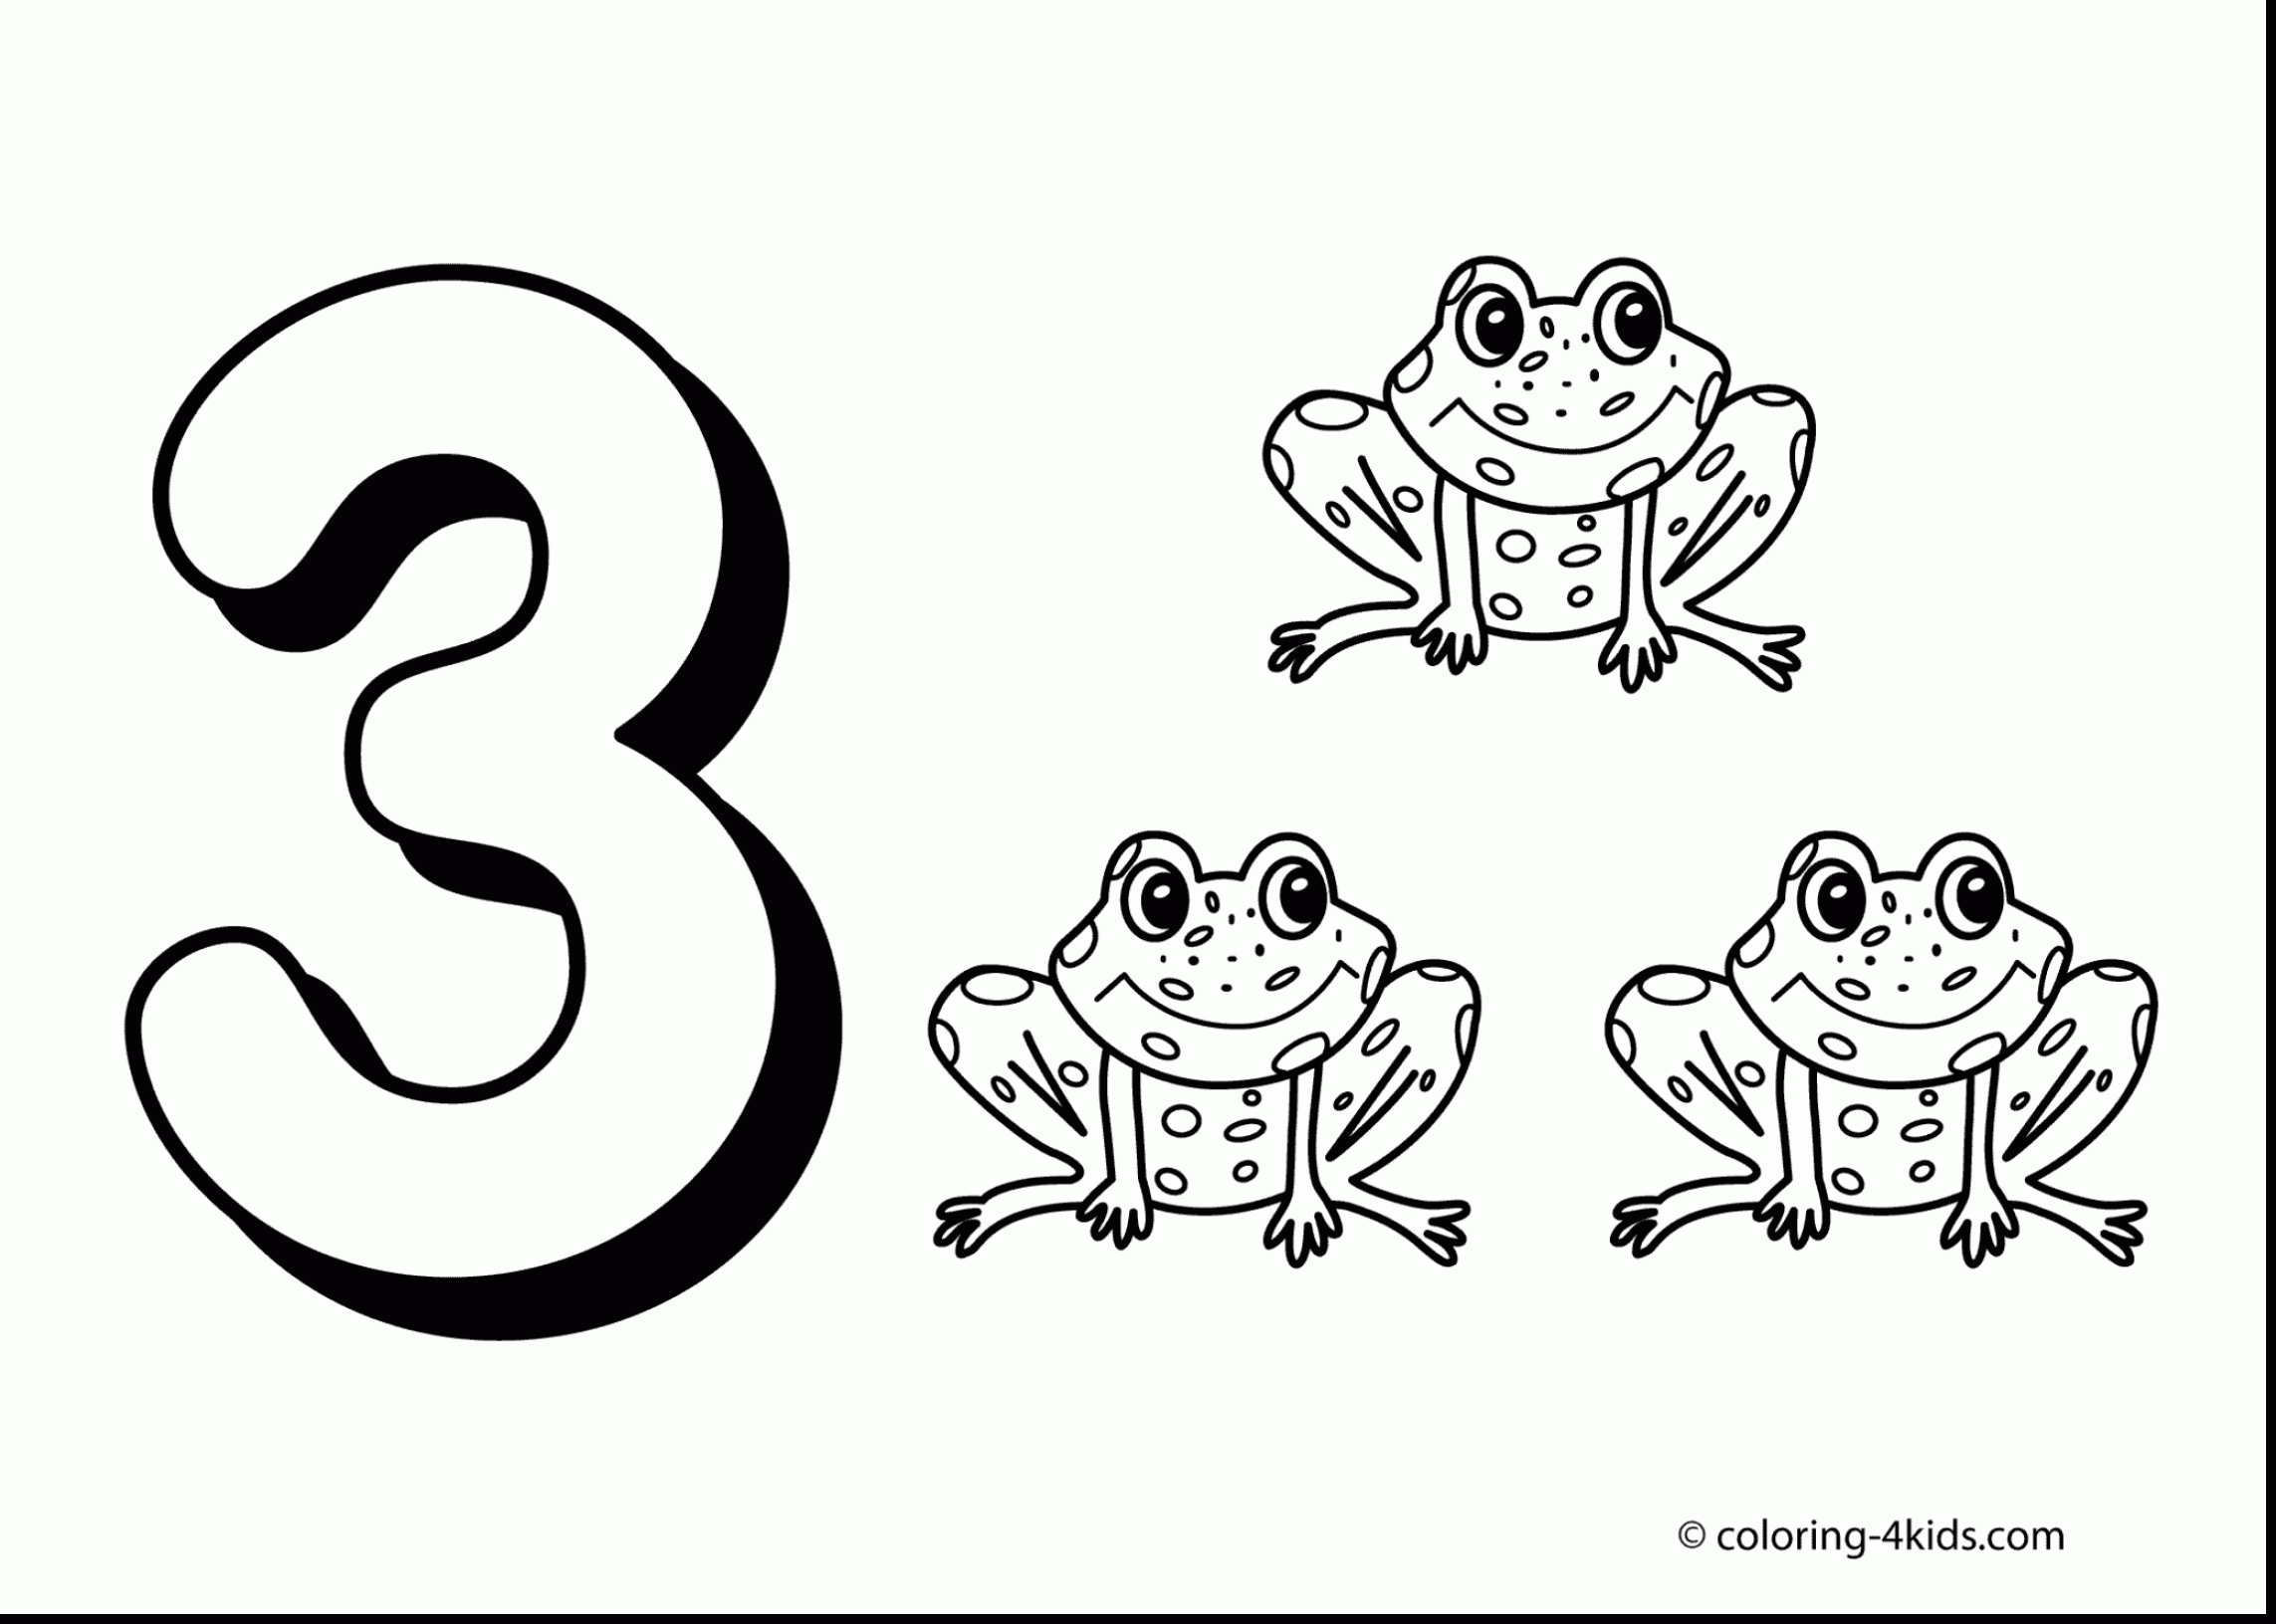 Surging Number Coloring Pages For Preschoolers Promising Pre K 